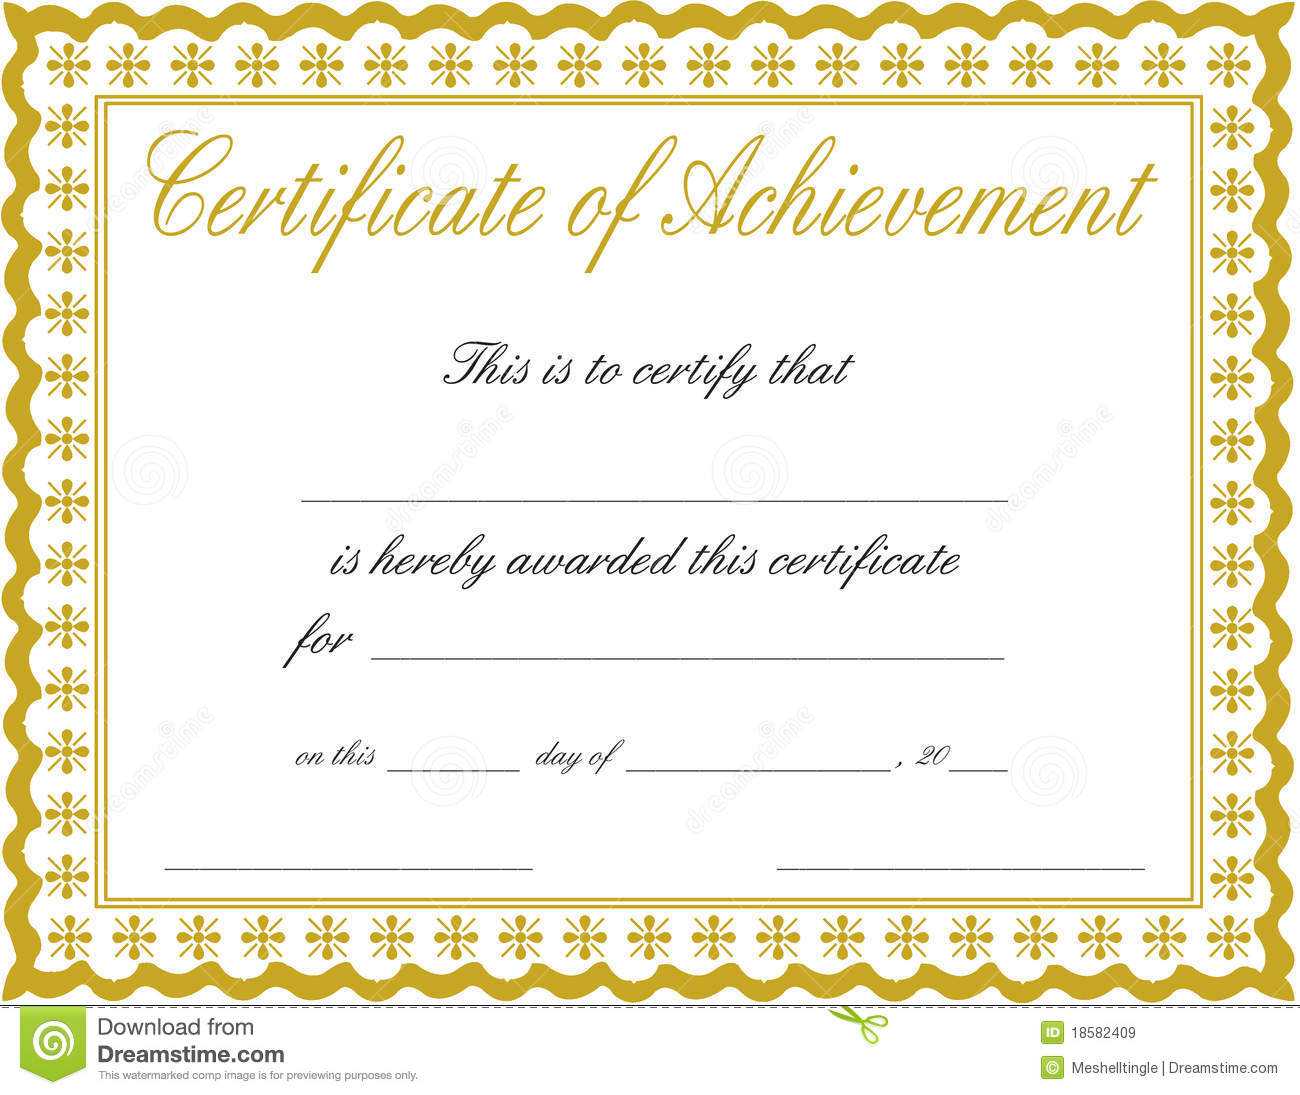 Certificate Of Accomplishment Template Inside Certificate Templates For Word Free Downloads